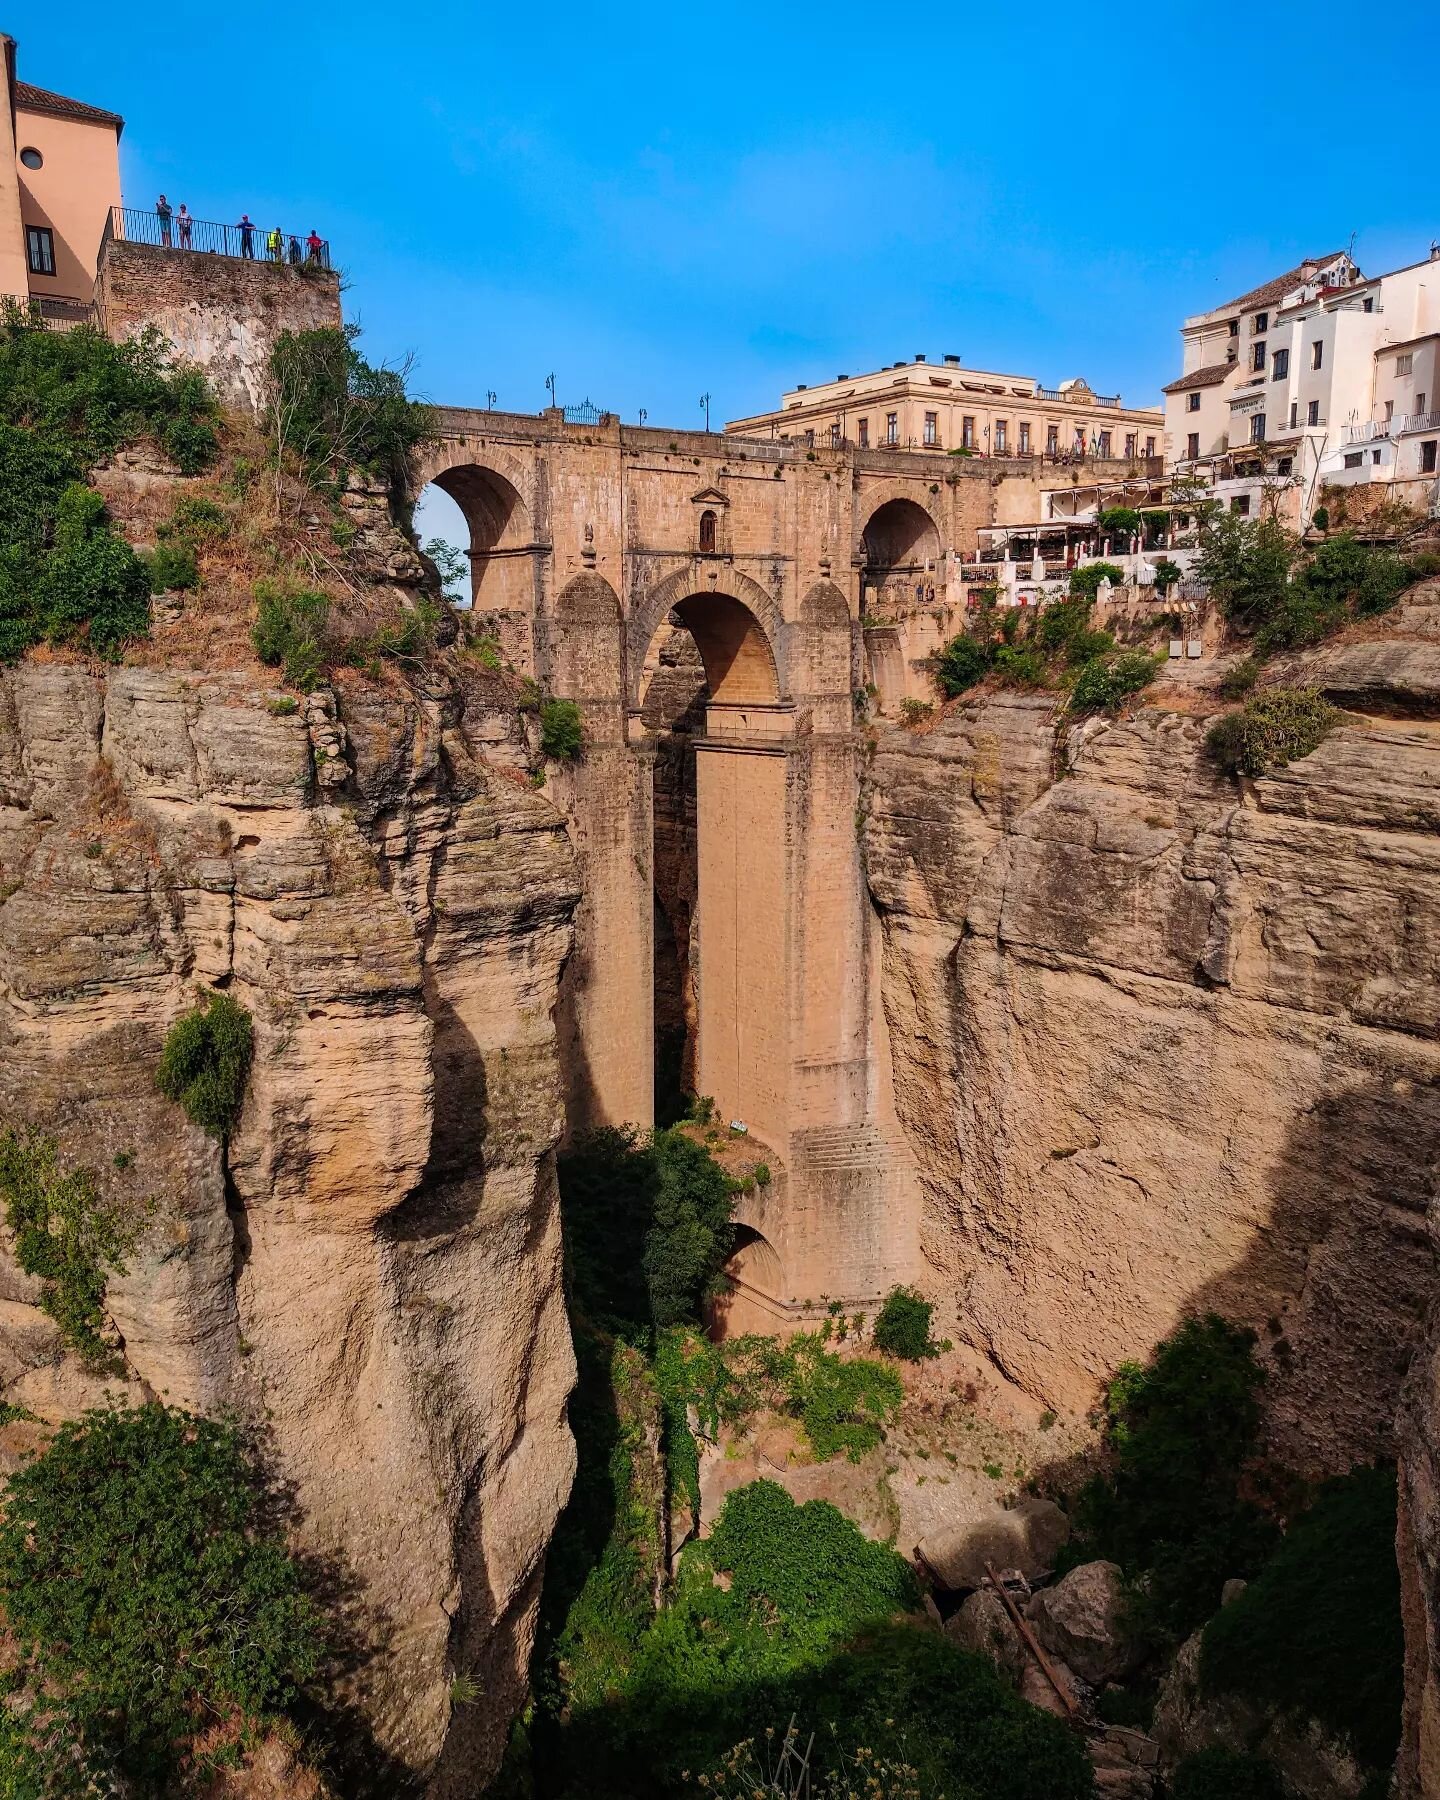 In Ronda, you'll find one of the most impressive gorges on the face of the earth. The closest thing to Middle Earth's Rivendell that I have ever seen. It's enchanting. It's breathtaking. It's magical. 

The gorge and iconic bridge has no obligations 